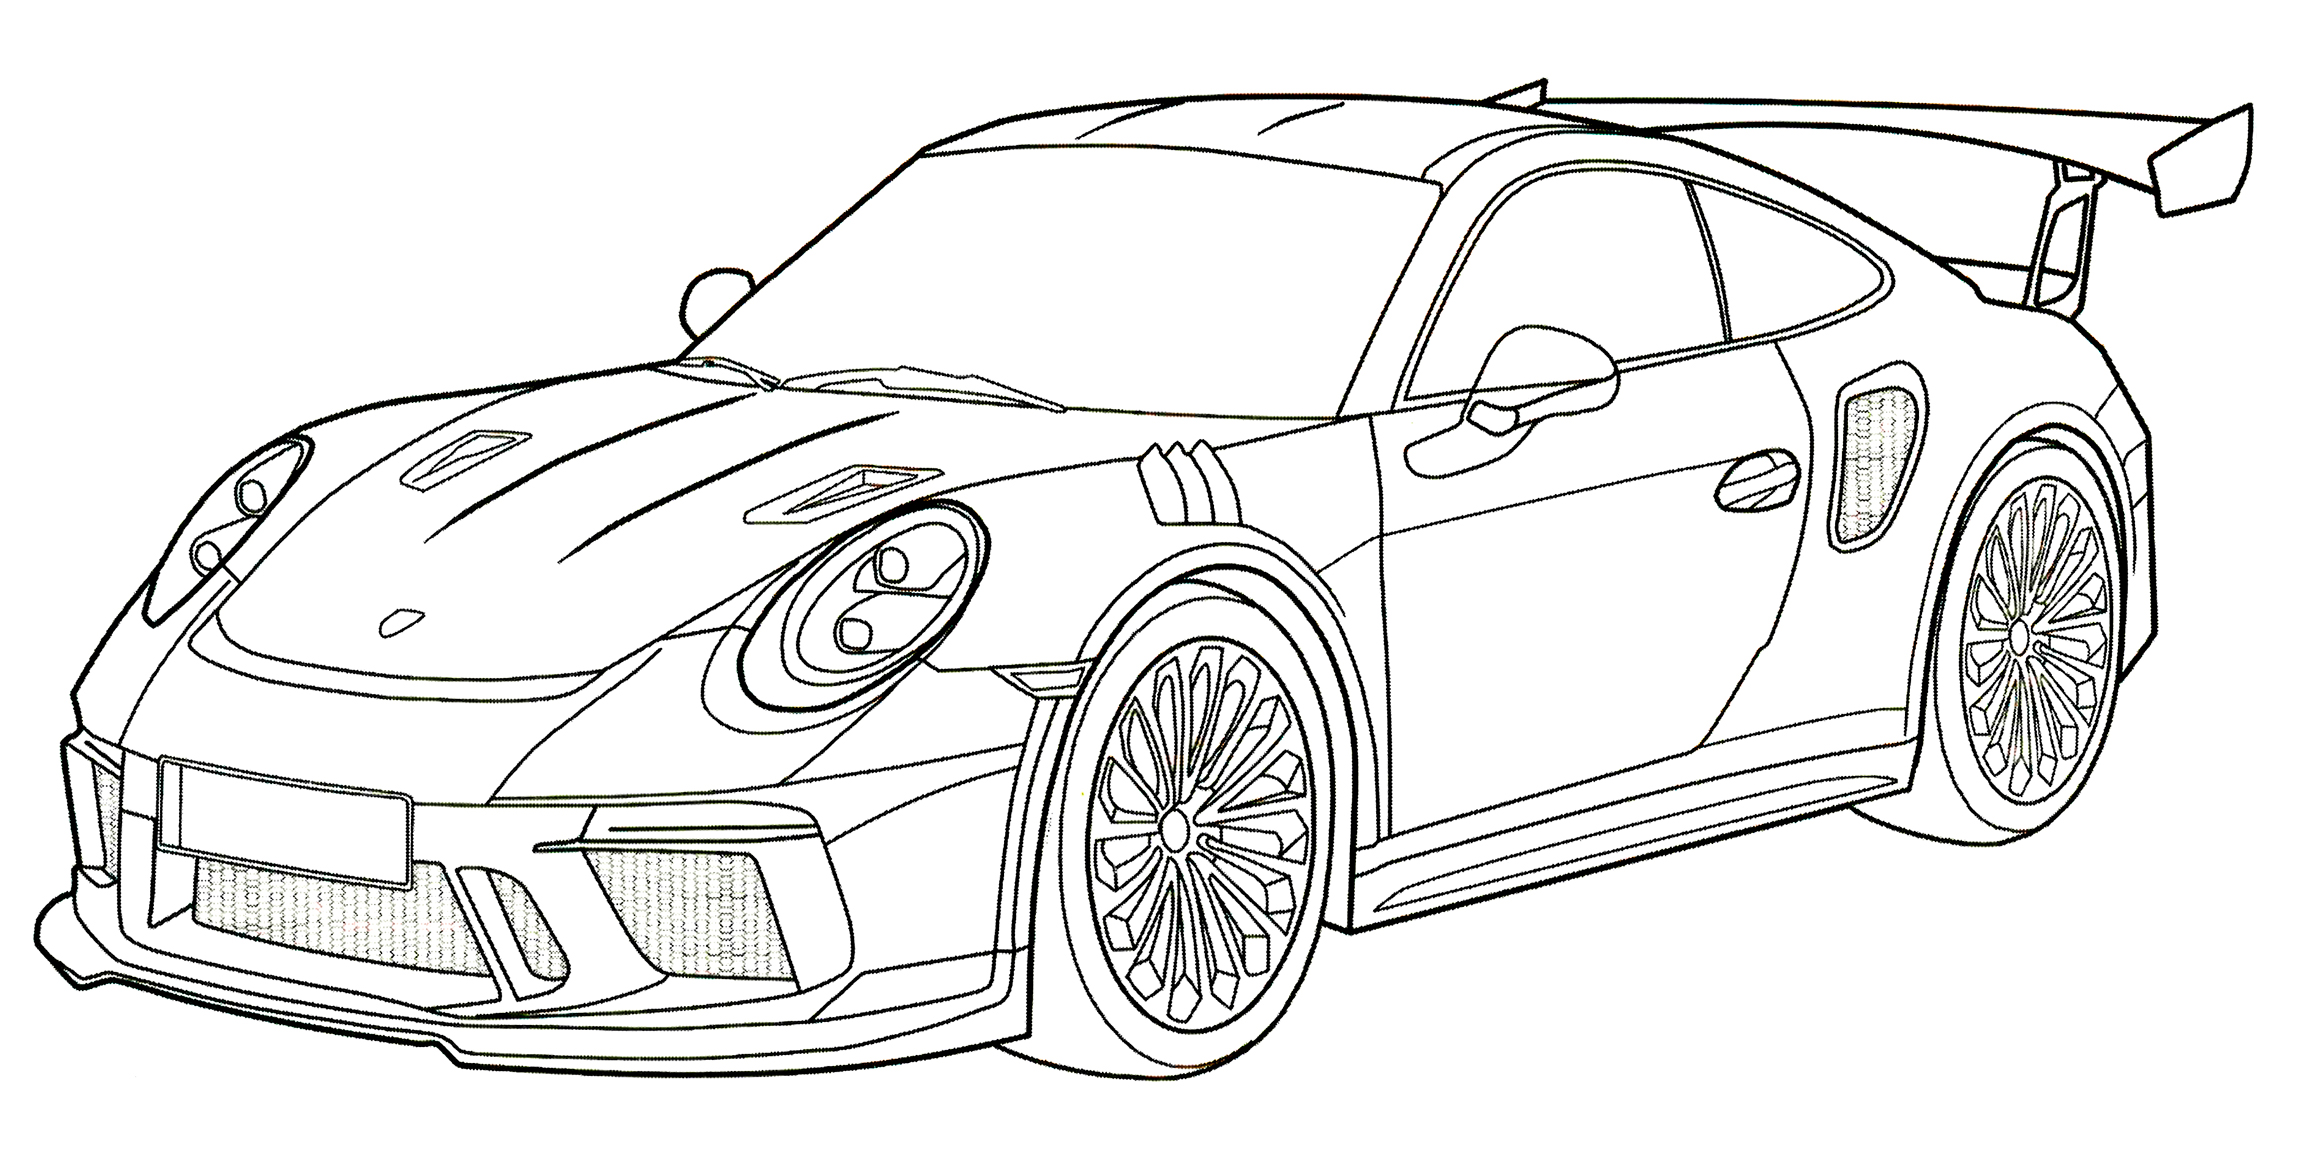 Porsche 911 GT3 RS coloring page - free and printable